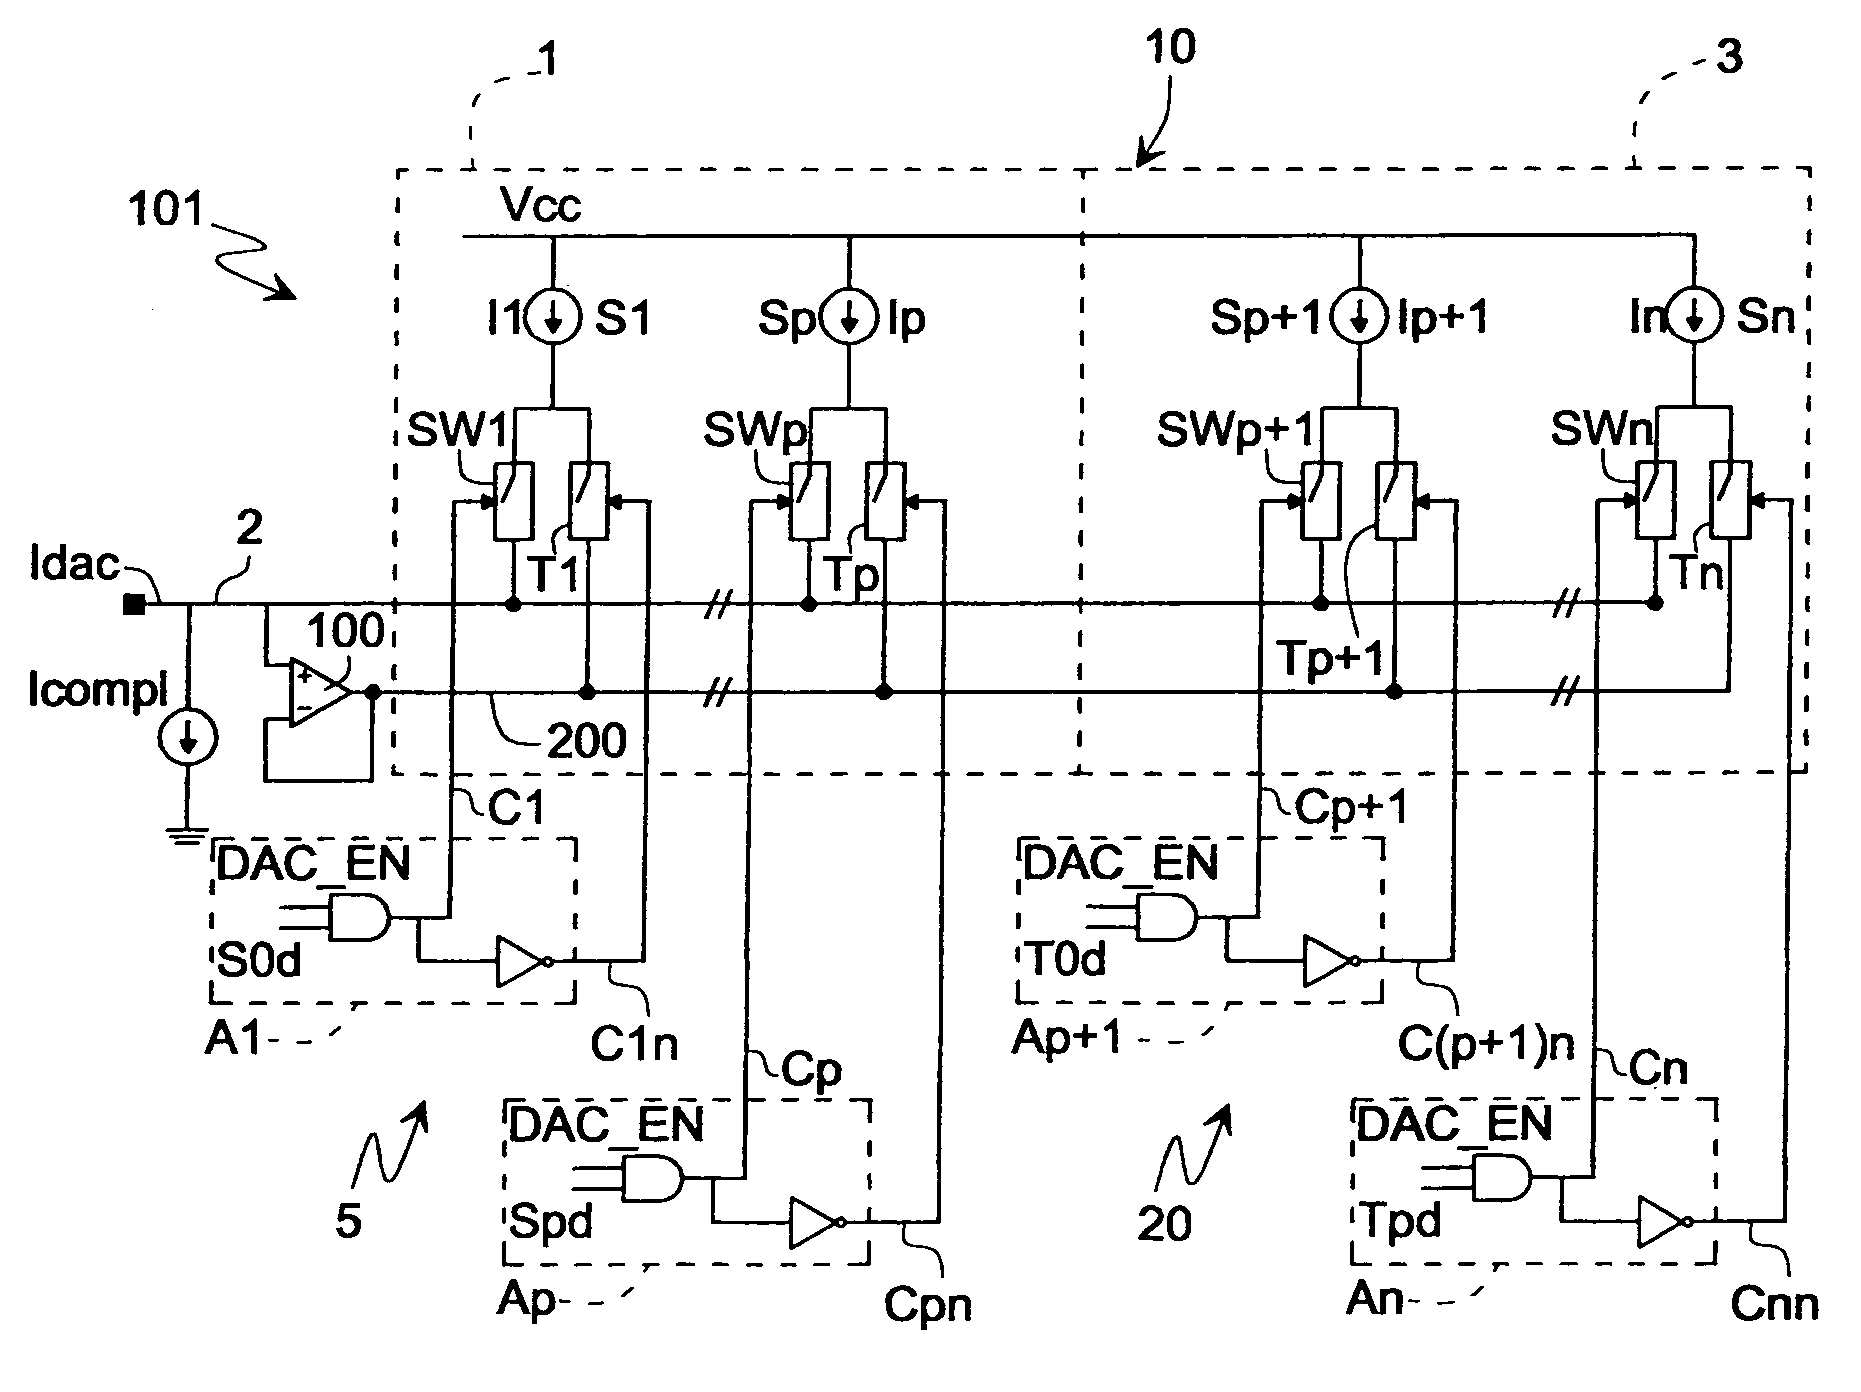 Apparatus for digital-analog conversion of a signal